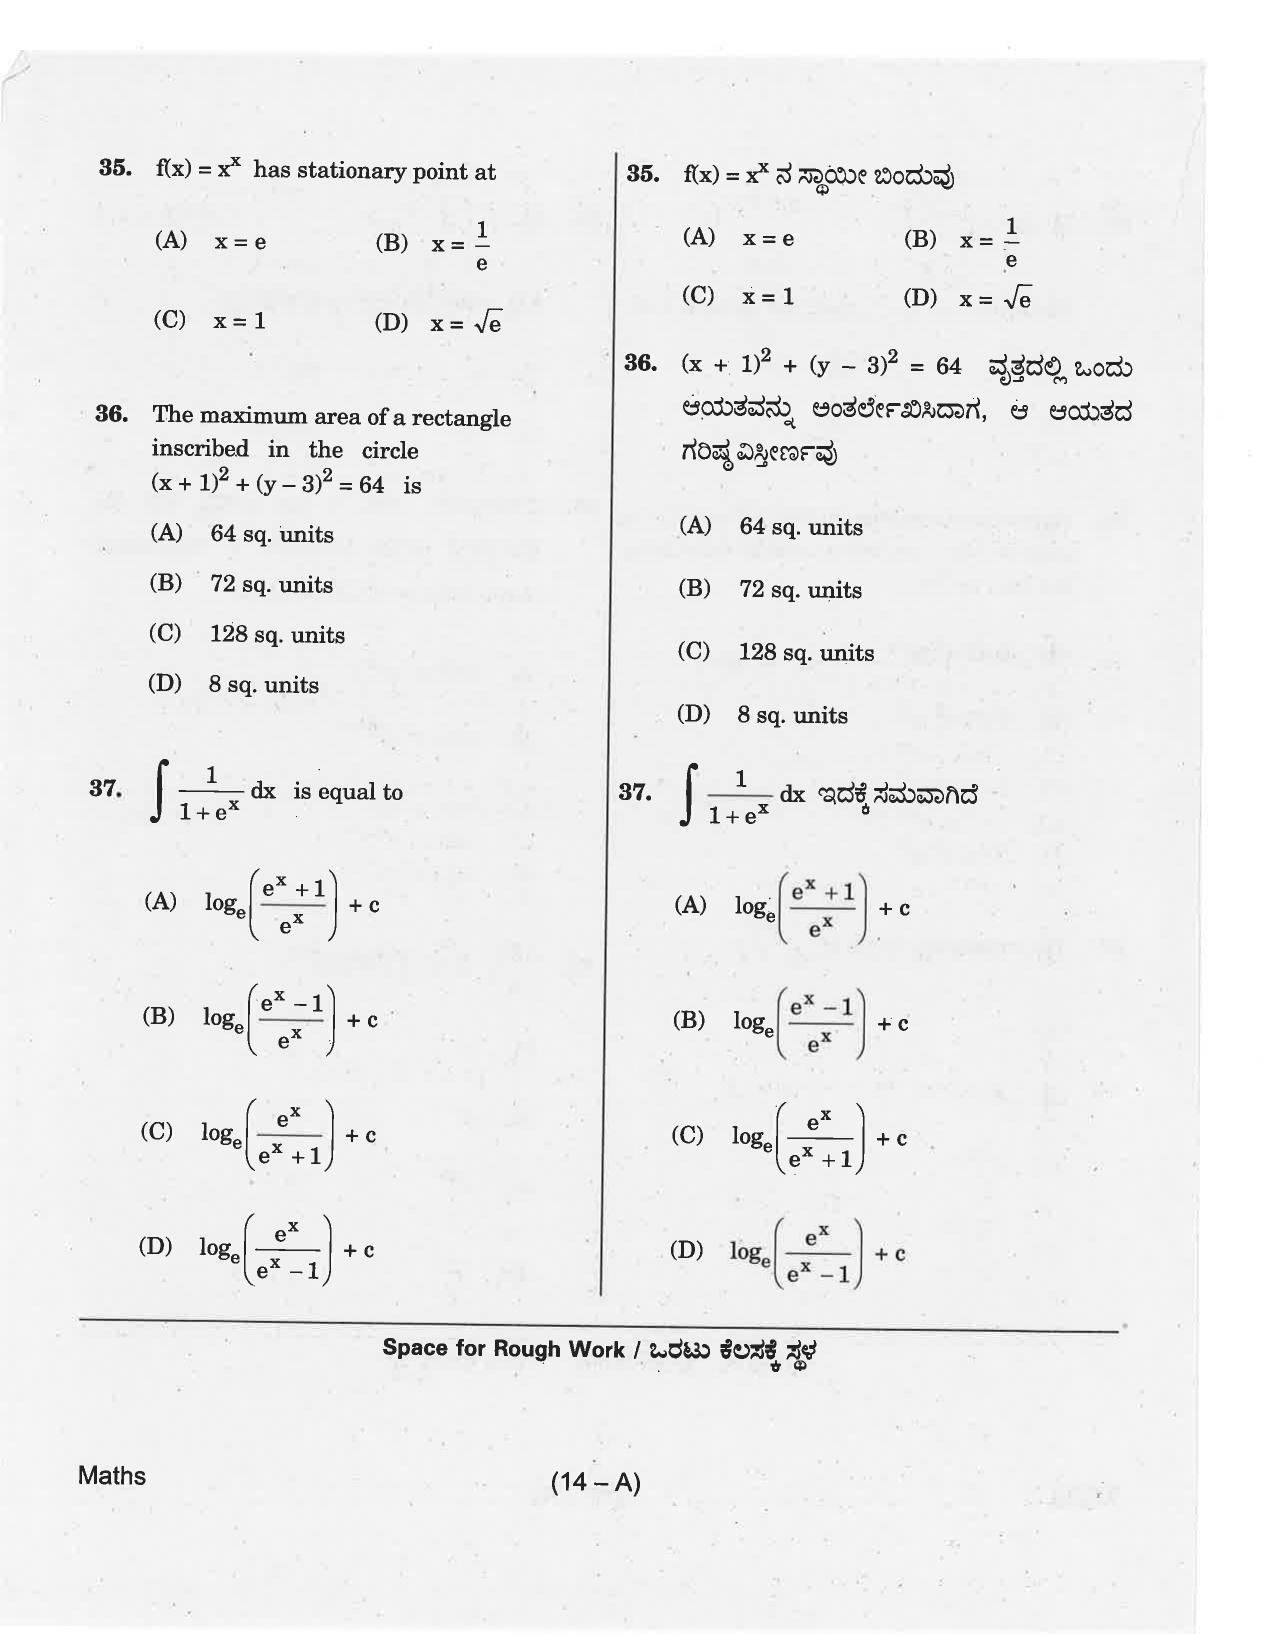 KCET Mathematics 2018 Question Papers - Page 14